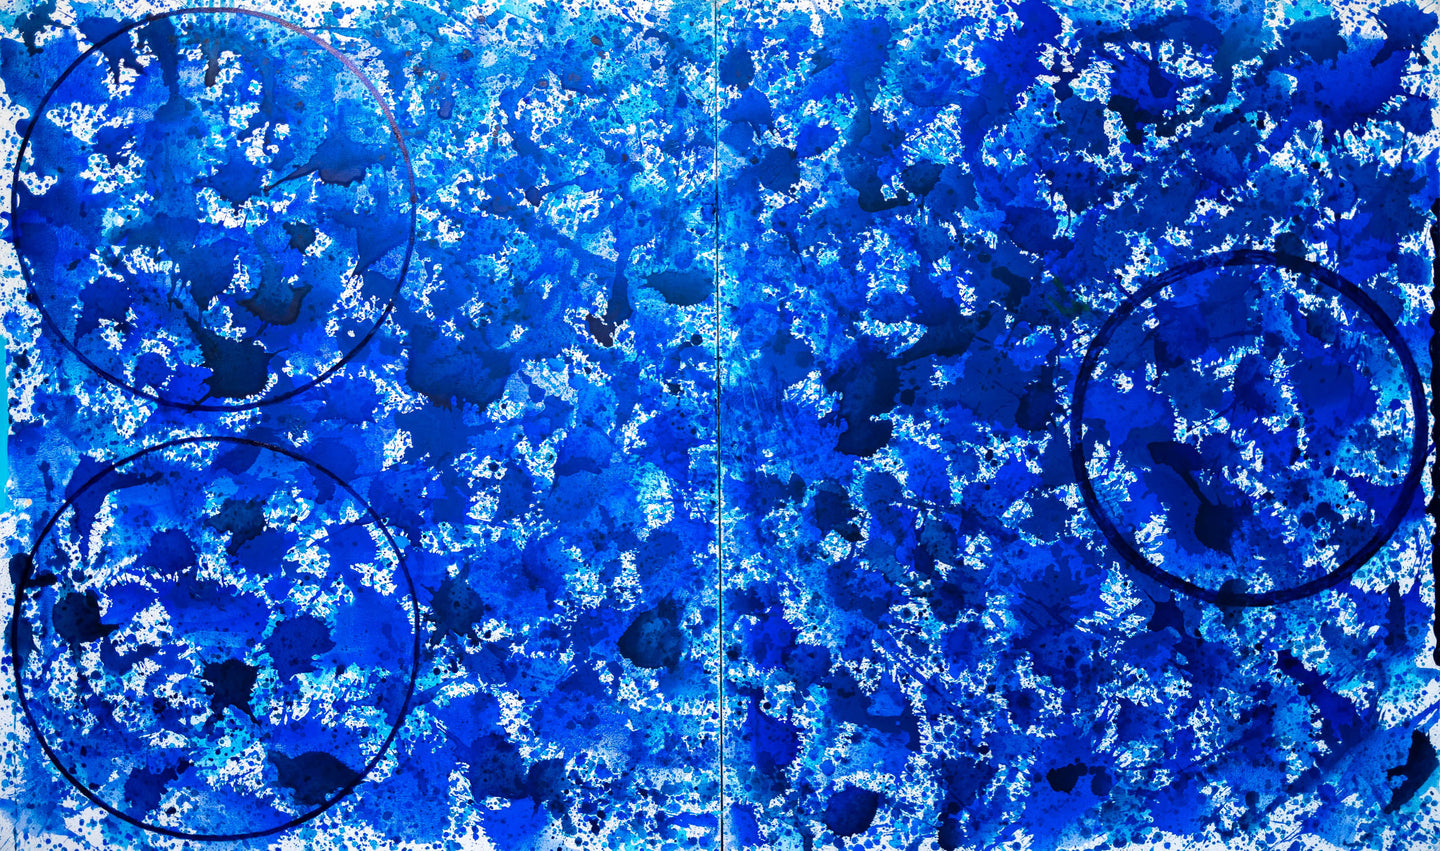 J. Steven Manolis, Splash, 2020, acrylic painting on canvas, 72 x 120 inches, Extra large Wall Art, Blue Abstract Art for sale at Manolis Projects Art Gallery, Miami, Fl